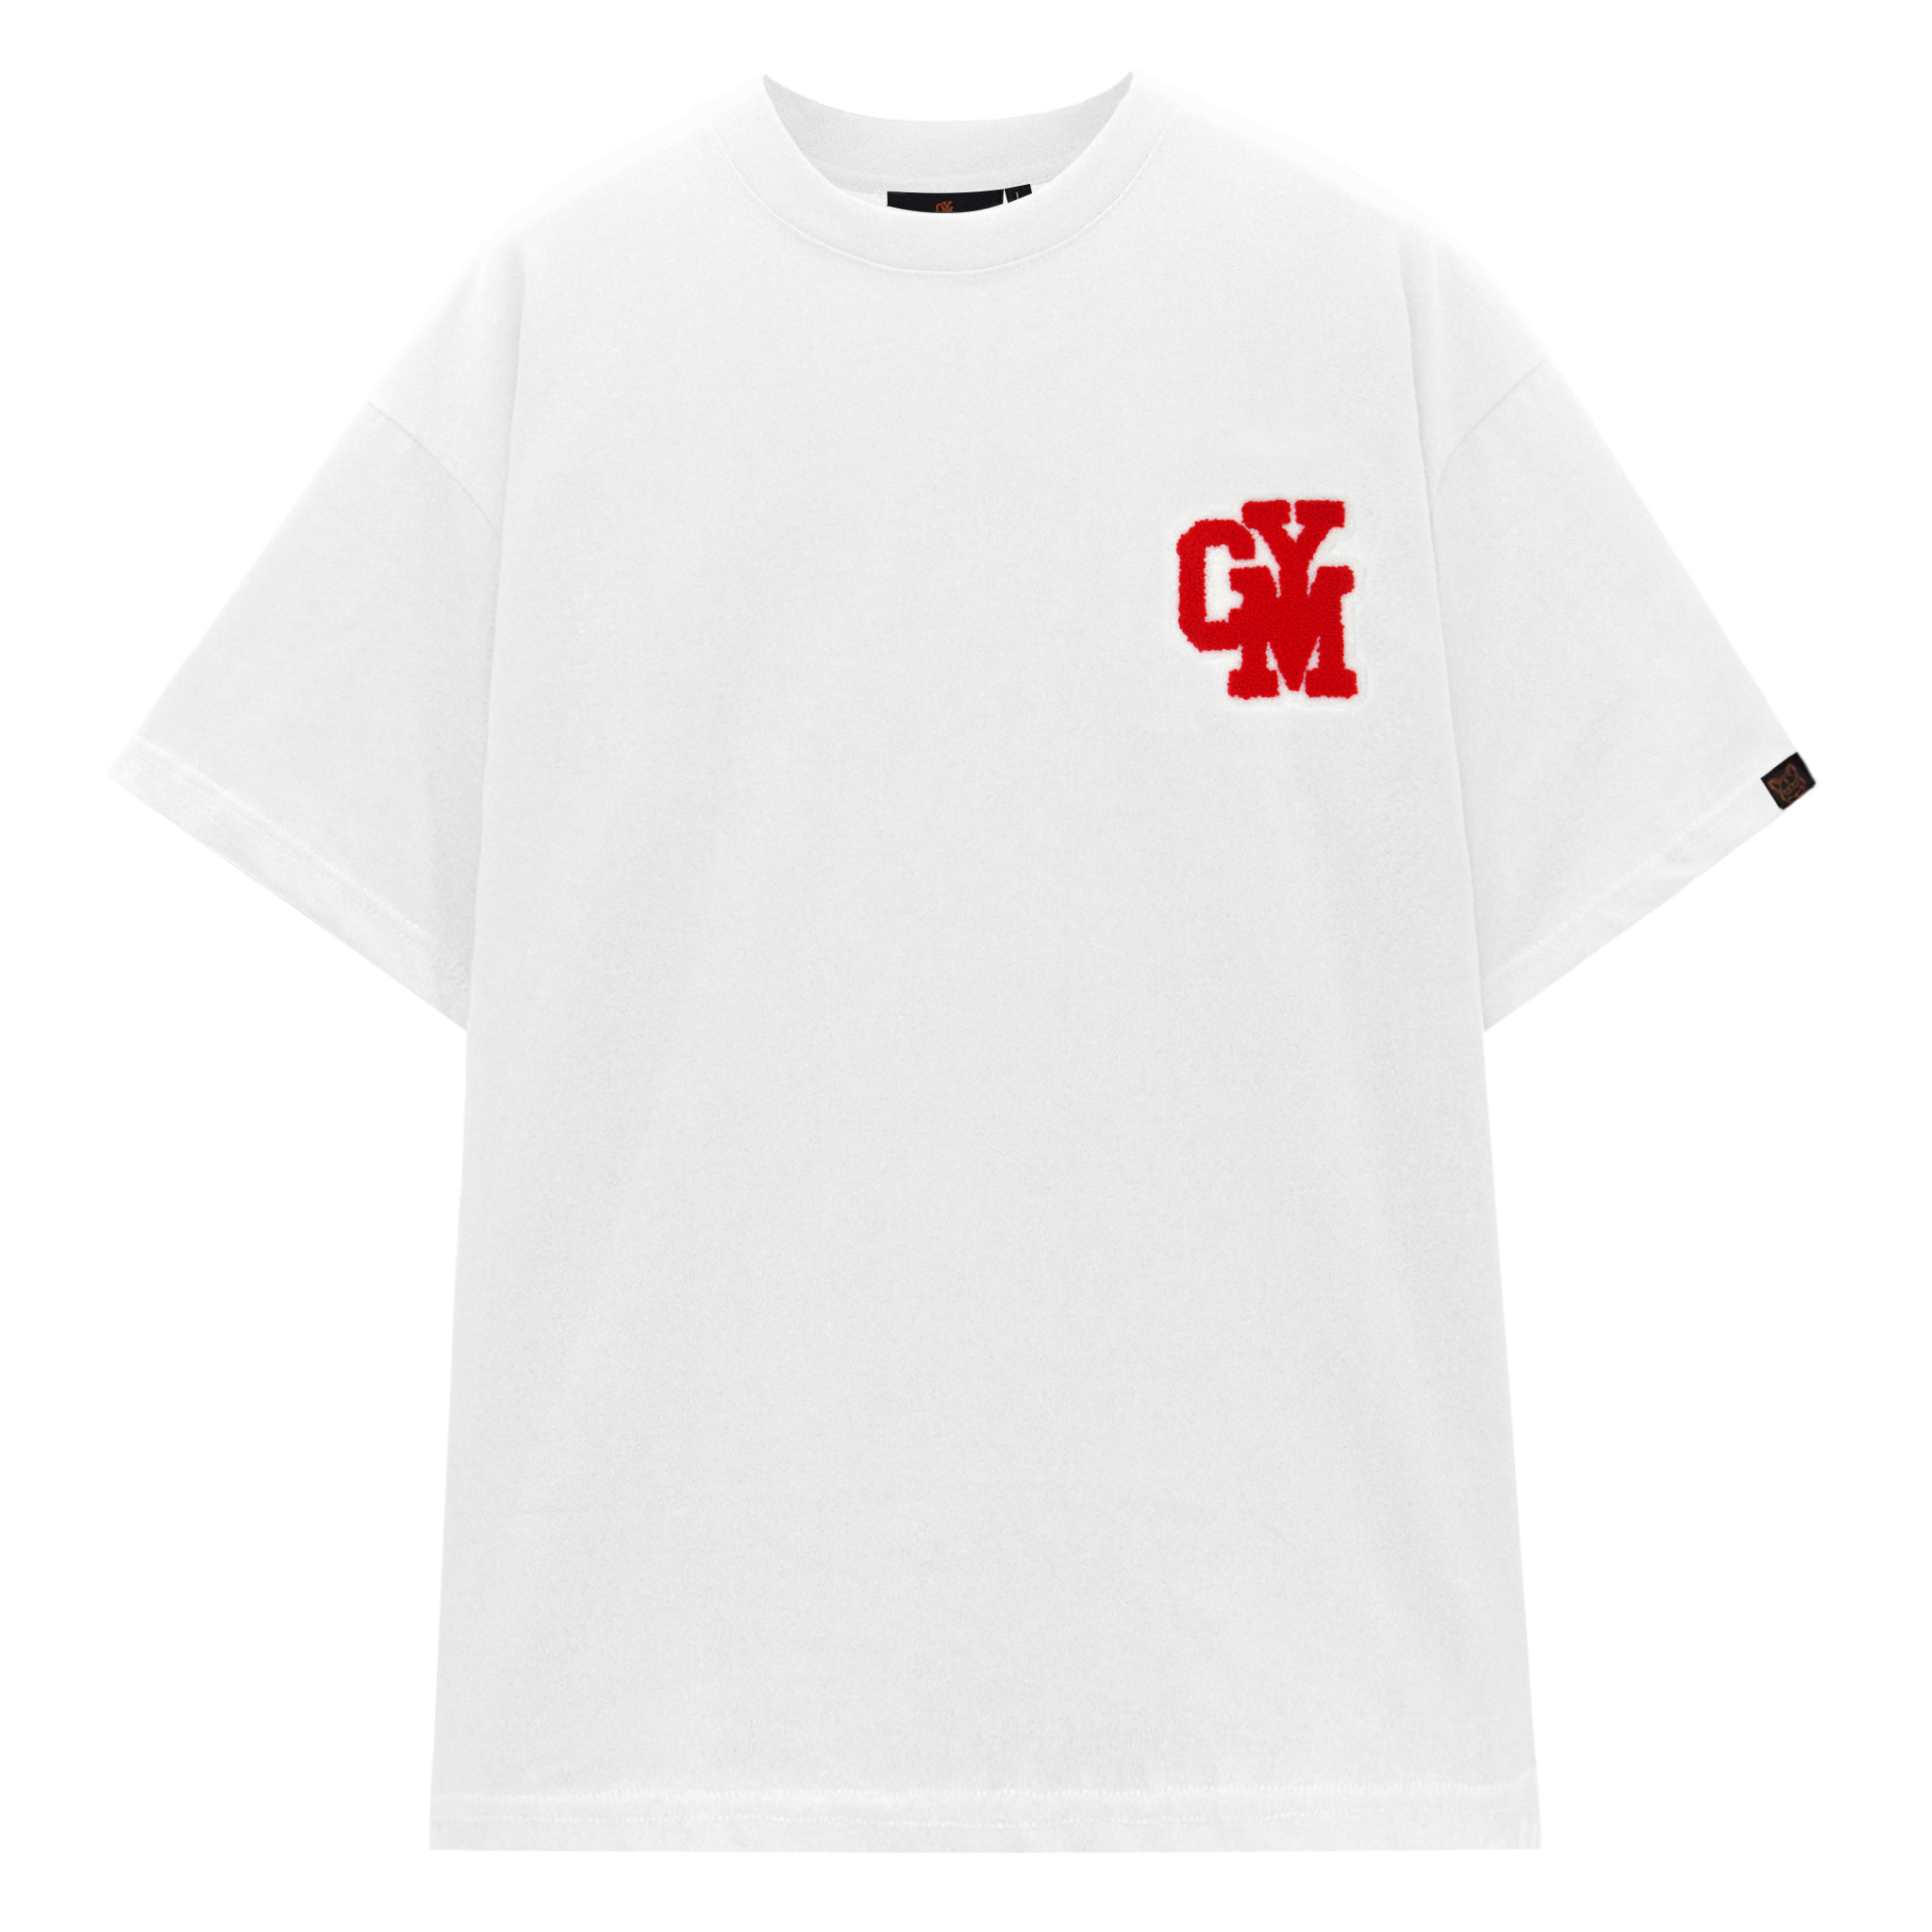 WHITE EMBROIDERED LOGO T-SHIRT Change Your Mind Streetwear